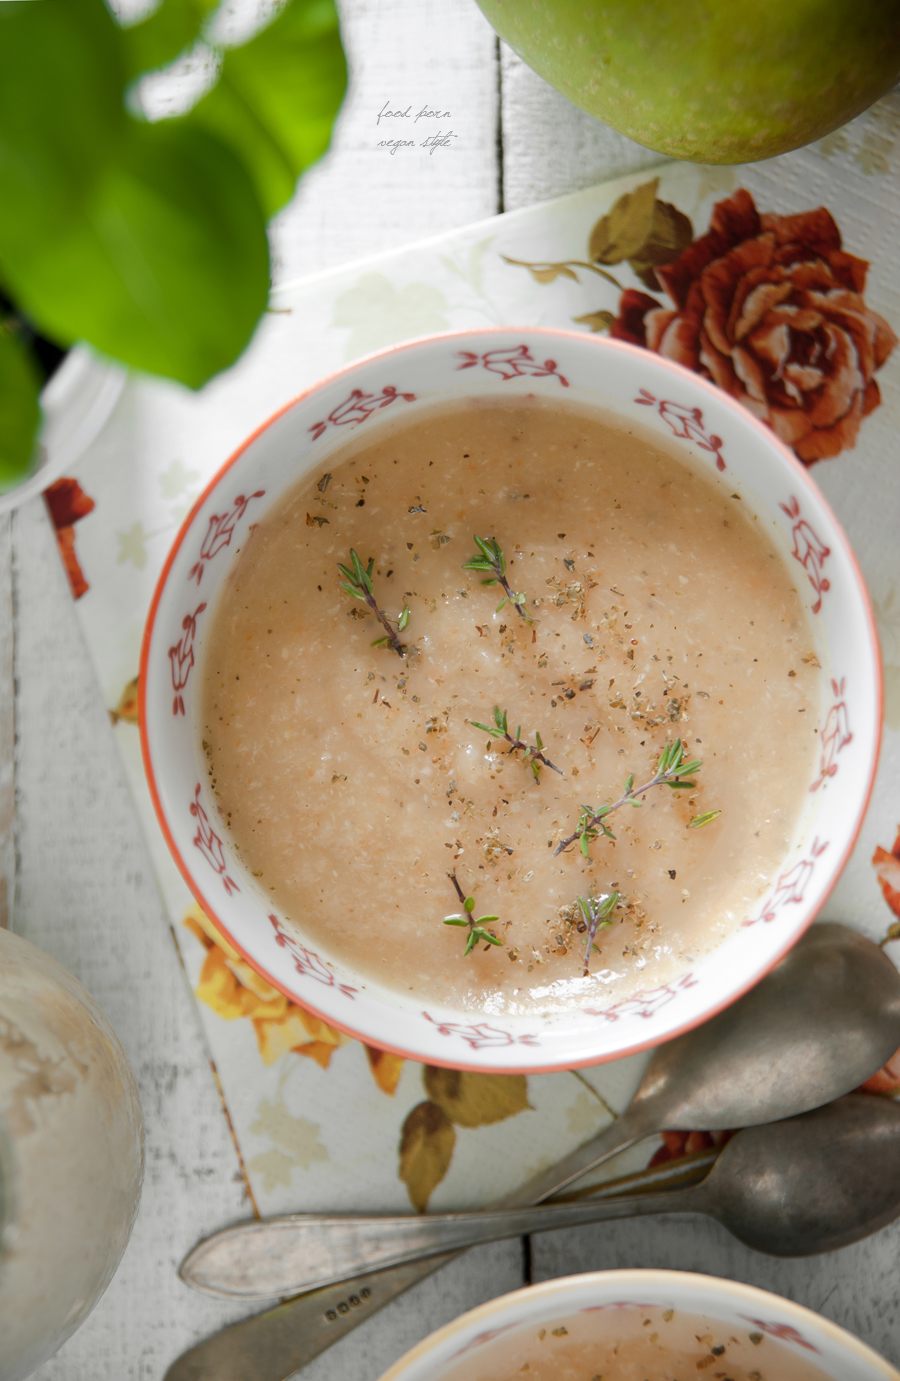 Horseradish soup with apples